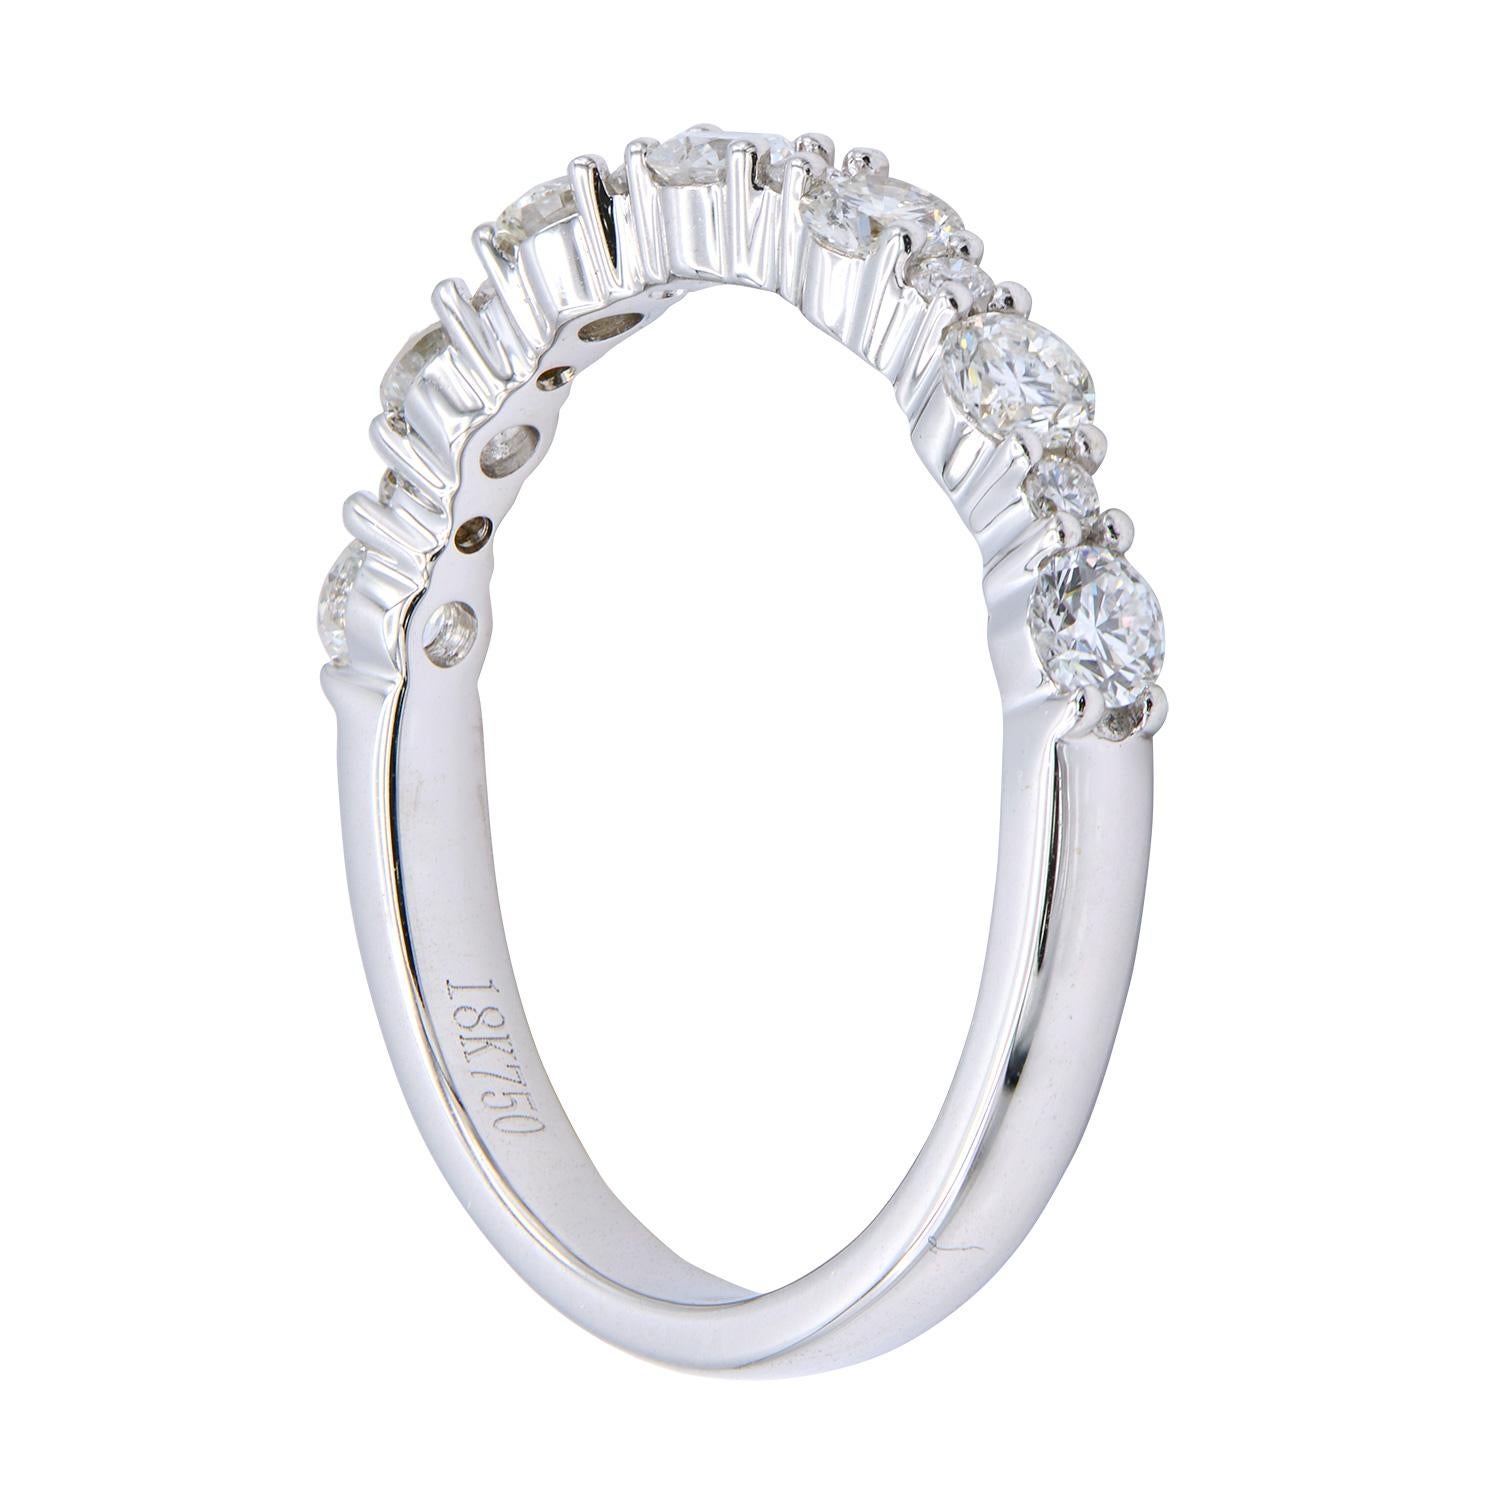 This classic diamond band adds a little twist by alternating between 2 size diamonds. Each band is made of 13 round VS2, G color diamonds totaling 0.69 carats which are set in 2.7 grams of 18 karat white gold. This ring is size 6.5 